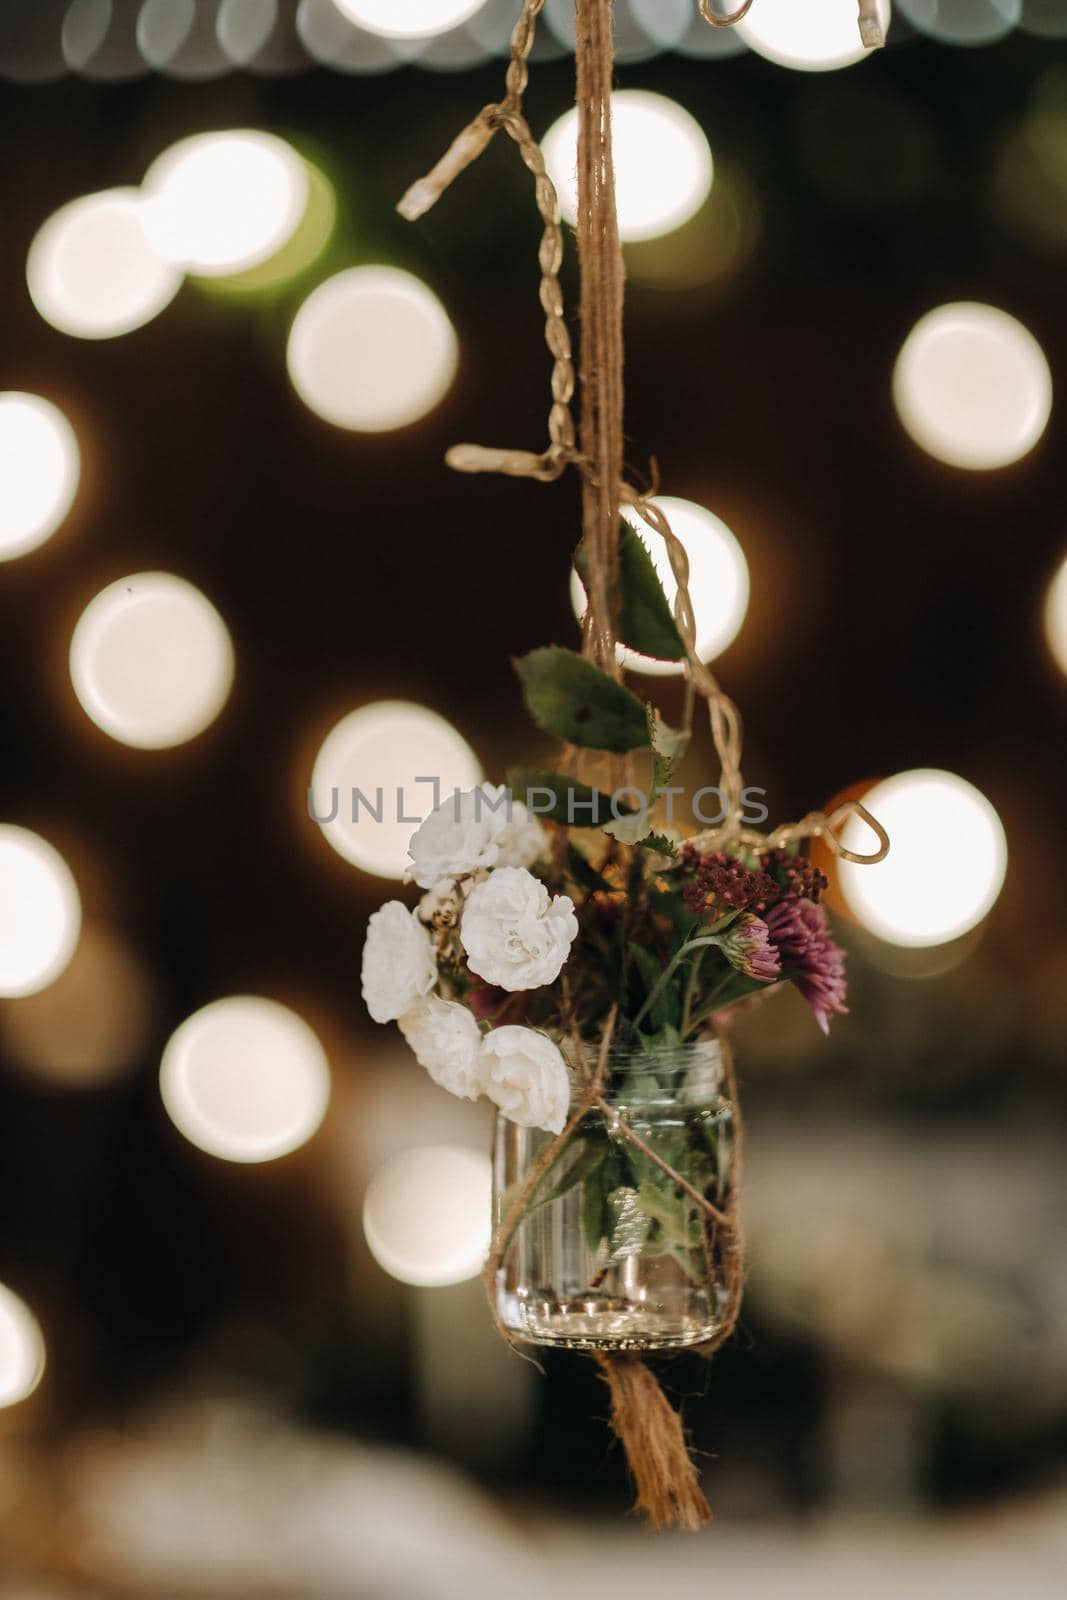 the wedding decor hangs near the candlelit dinner table.Dinner with candles by Lobachad